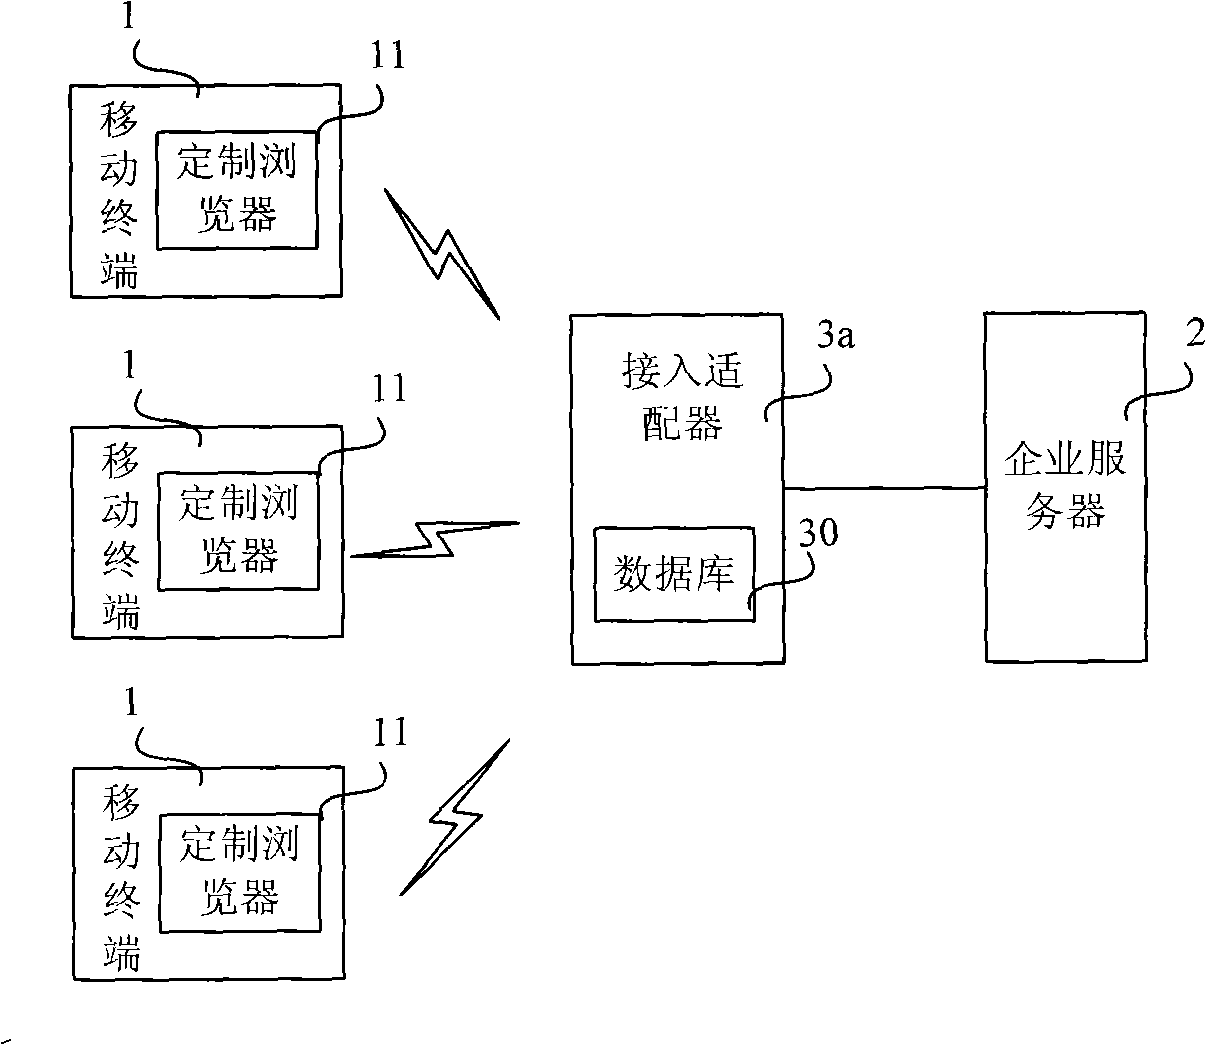 Mobile office system and method